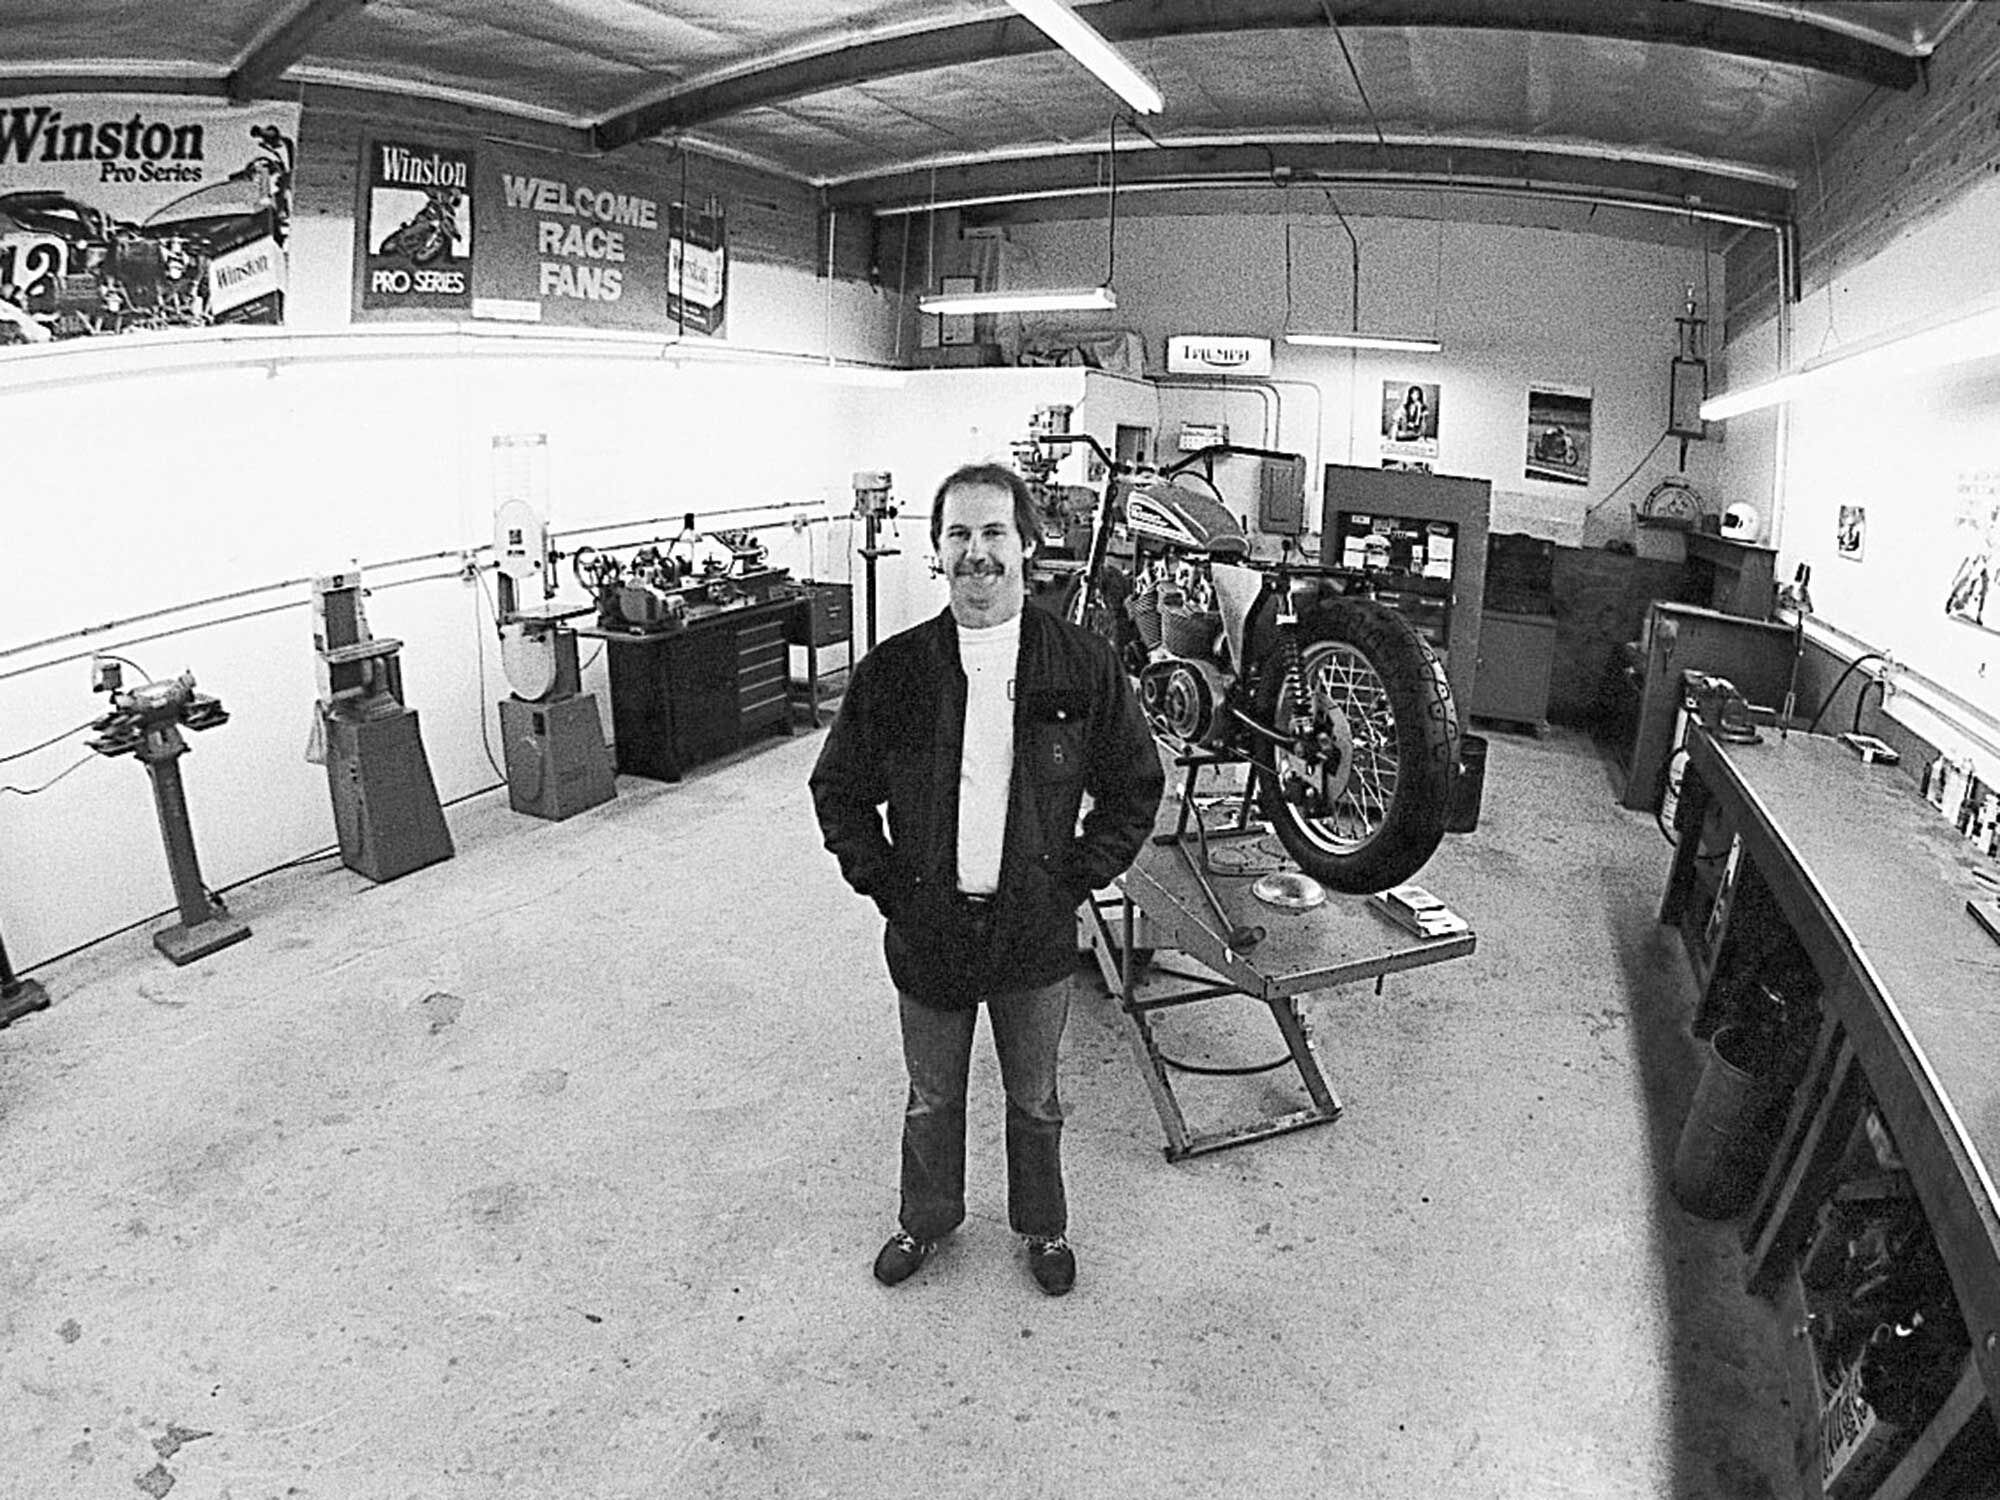 The first Storz Performance shop in Ventura, California, in 1981. Here Storz developed a 42mm Ceriani fork for Sportsters, and Superbike Bar Mounts for Ninja 600s, early successful street products.